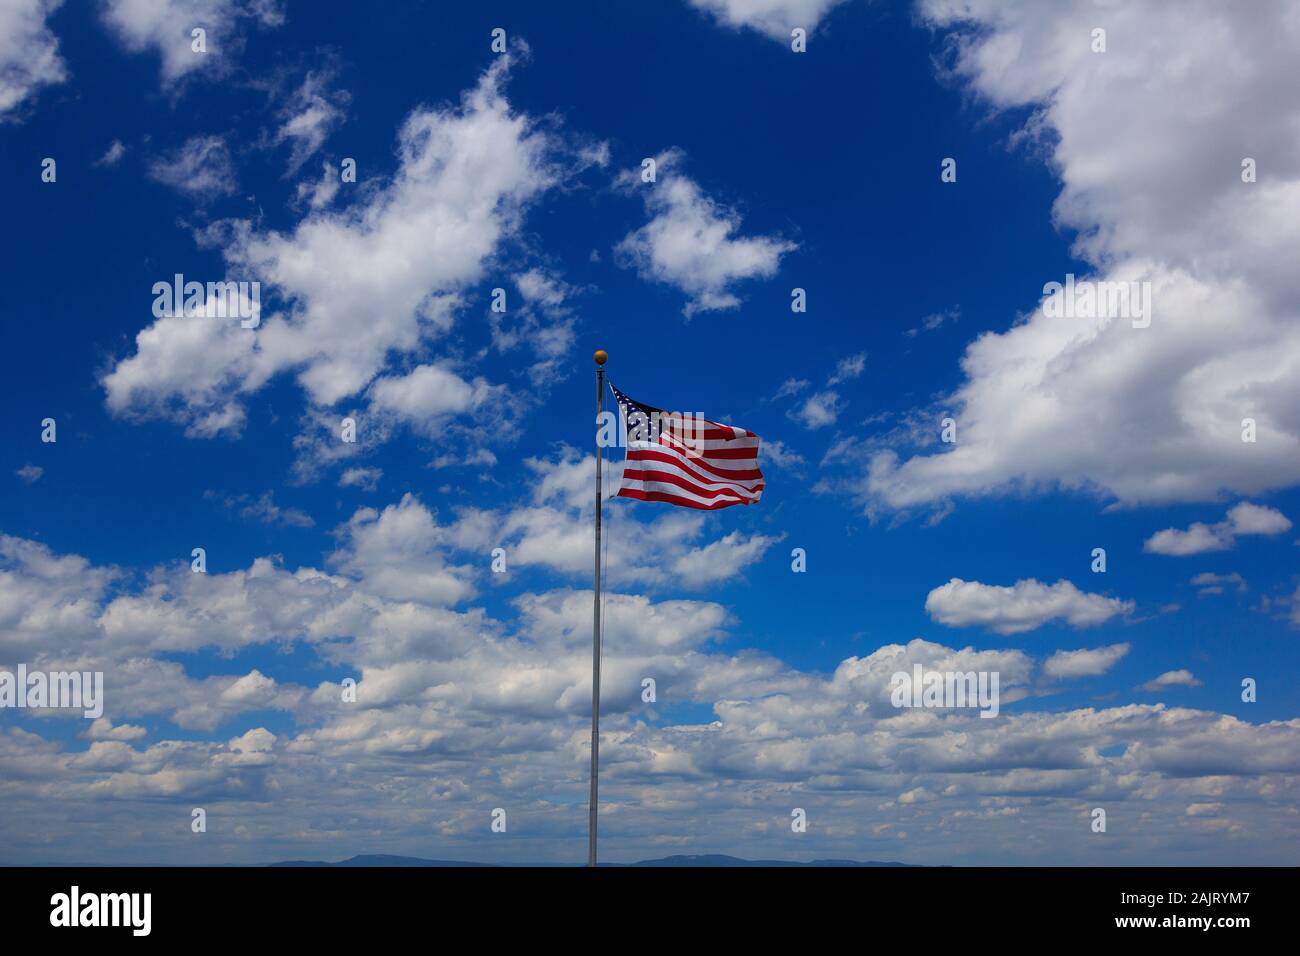 American Flag flying against blue sky and clouds with Blue Ridge Mountains in the background. Stock Photo